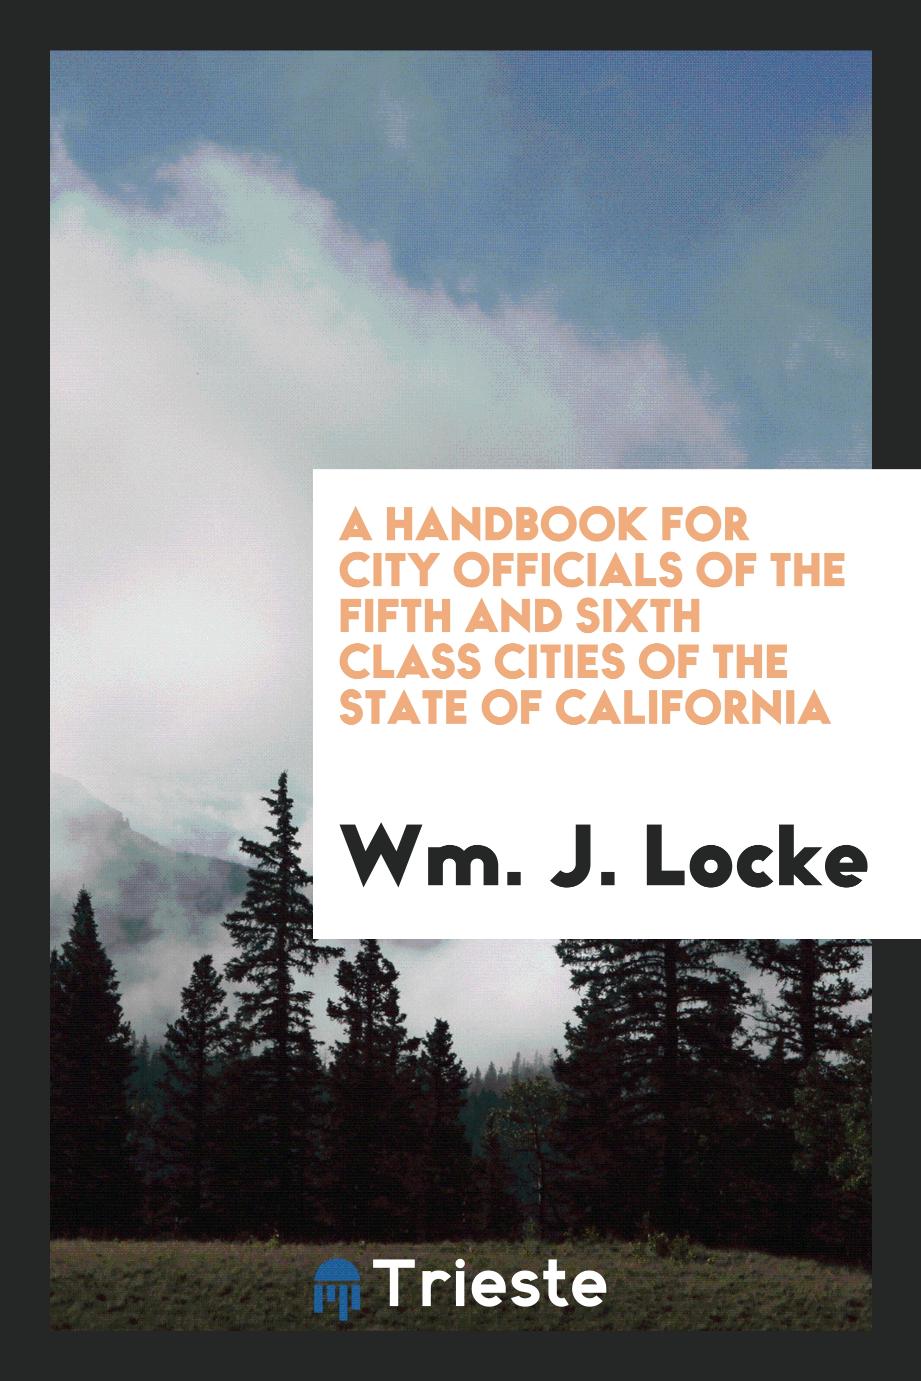 A handbook for city officials of the fifth and sixth class cities of the State of California